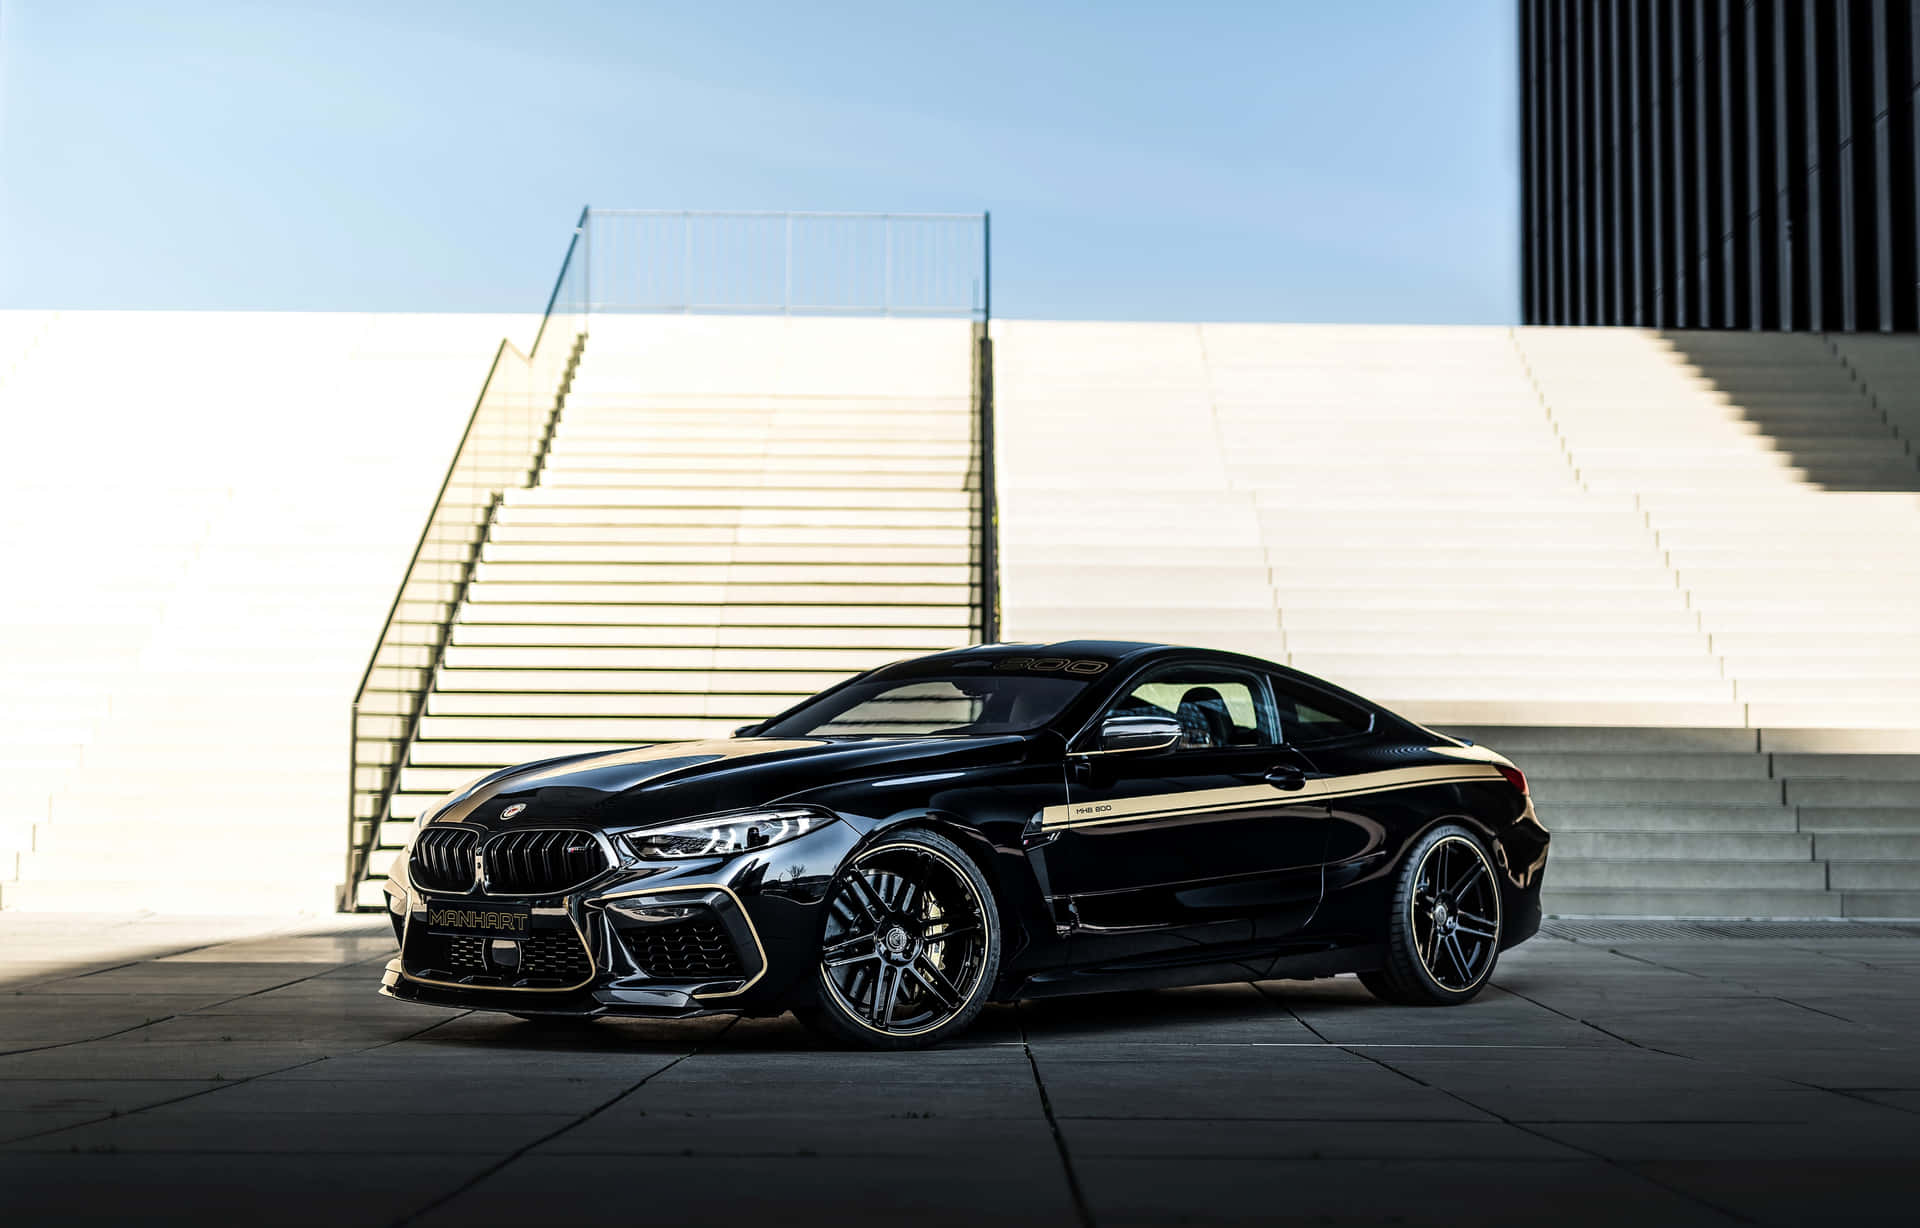 Experience the thrill of driving a BMW M8 Wallpaper